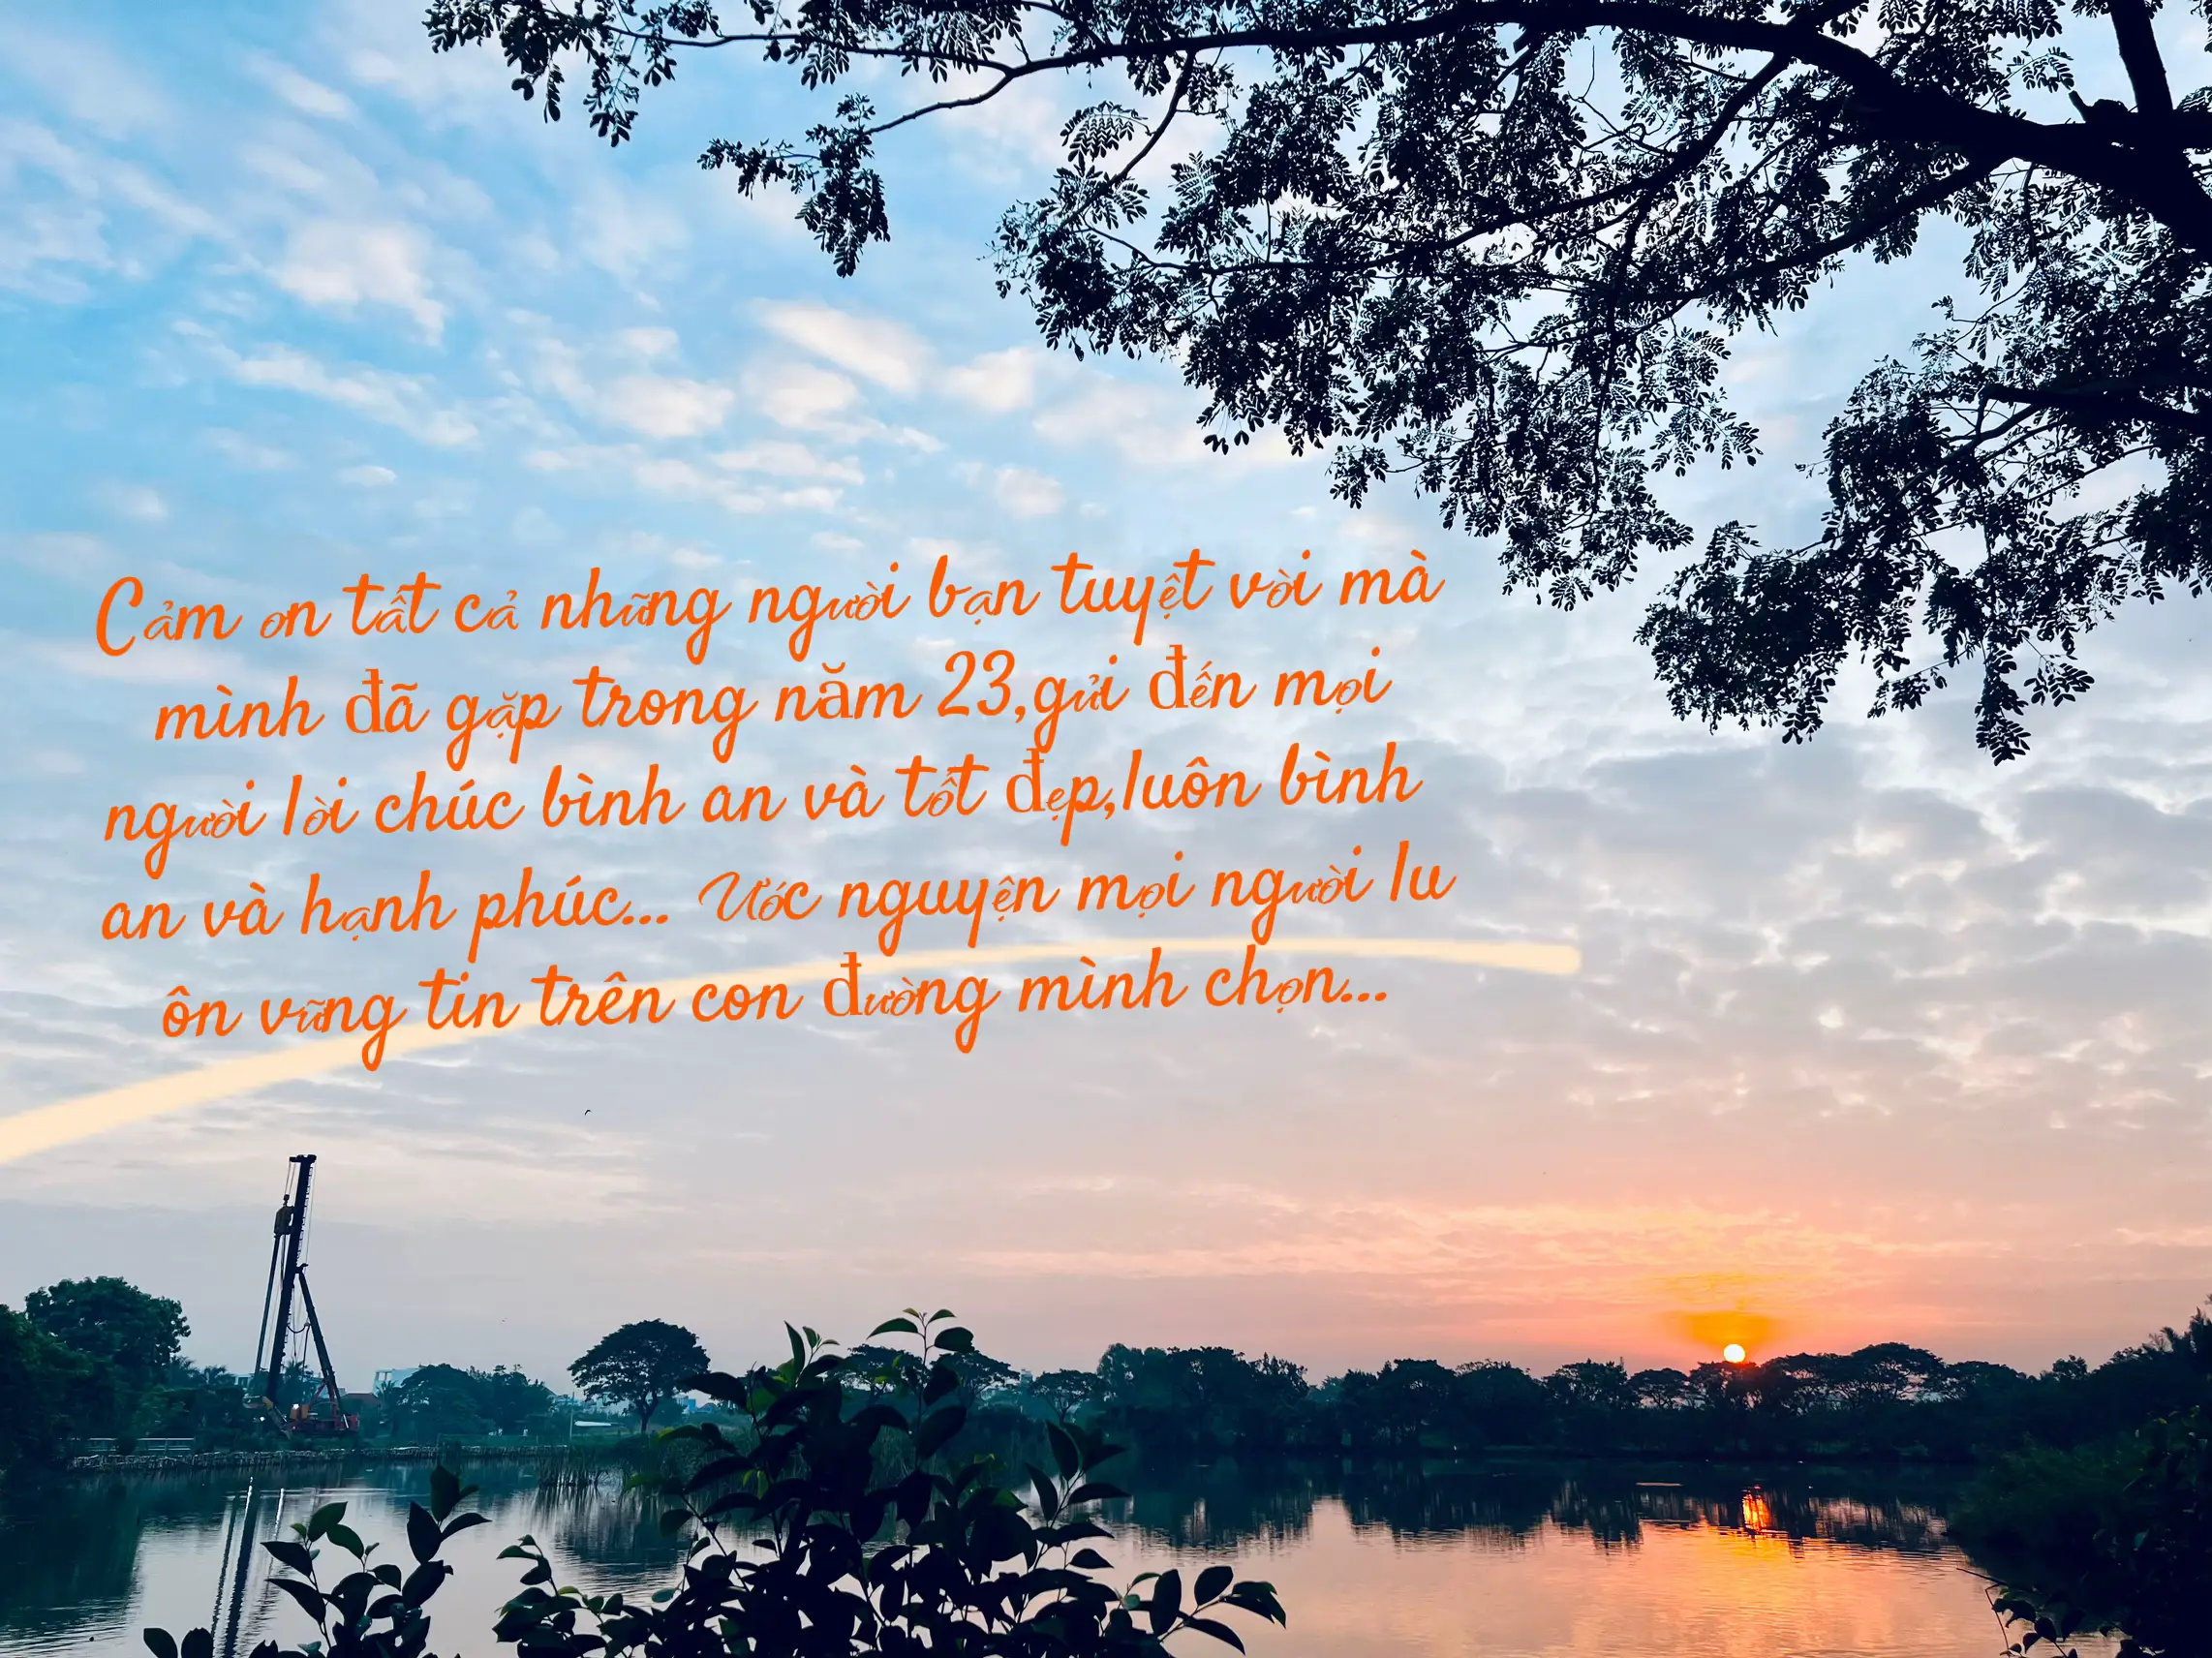  A picture of a sunset with a quote